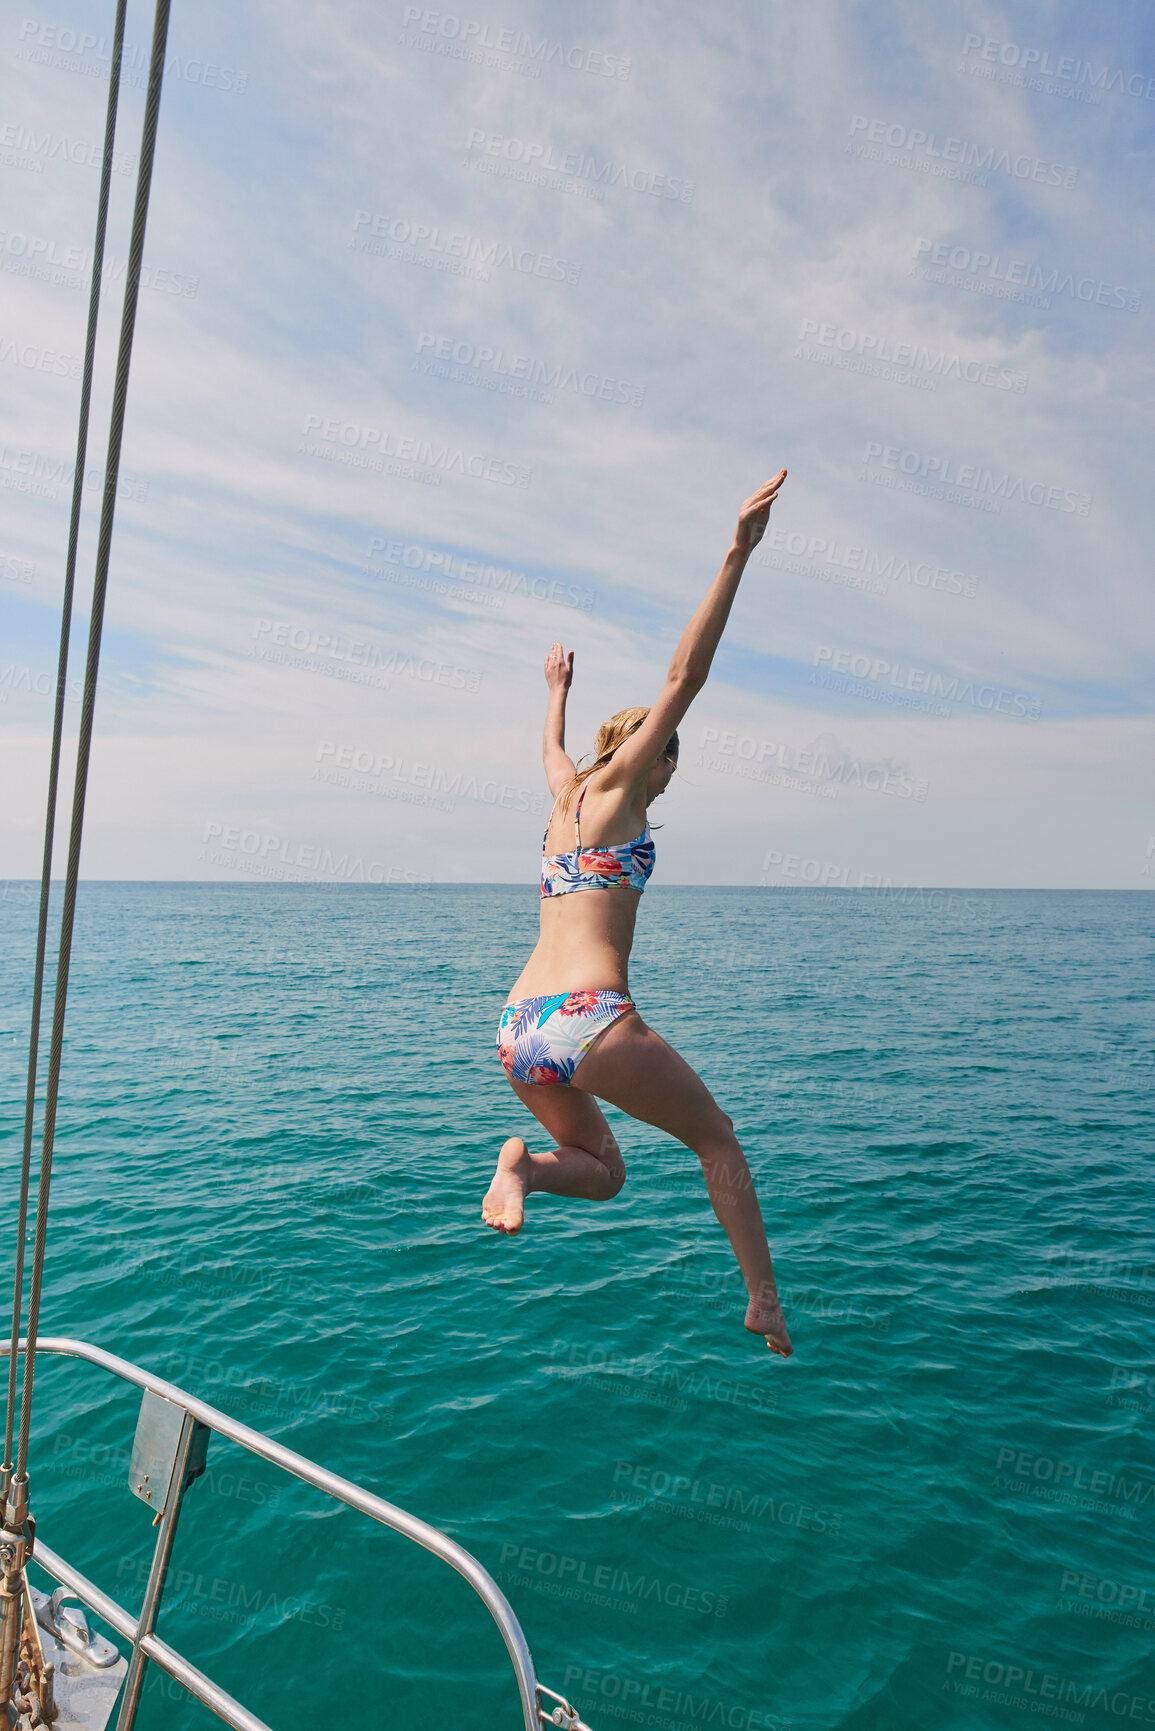 Buy stock photo Excited young woman jumping off a boat during a holiday cruise to swim in the ocean. Young woman in bikini ready to swim in the ocean after excitedly jumping from boat